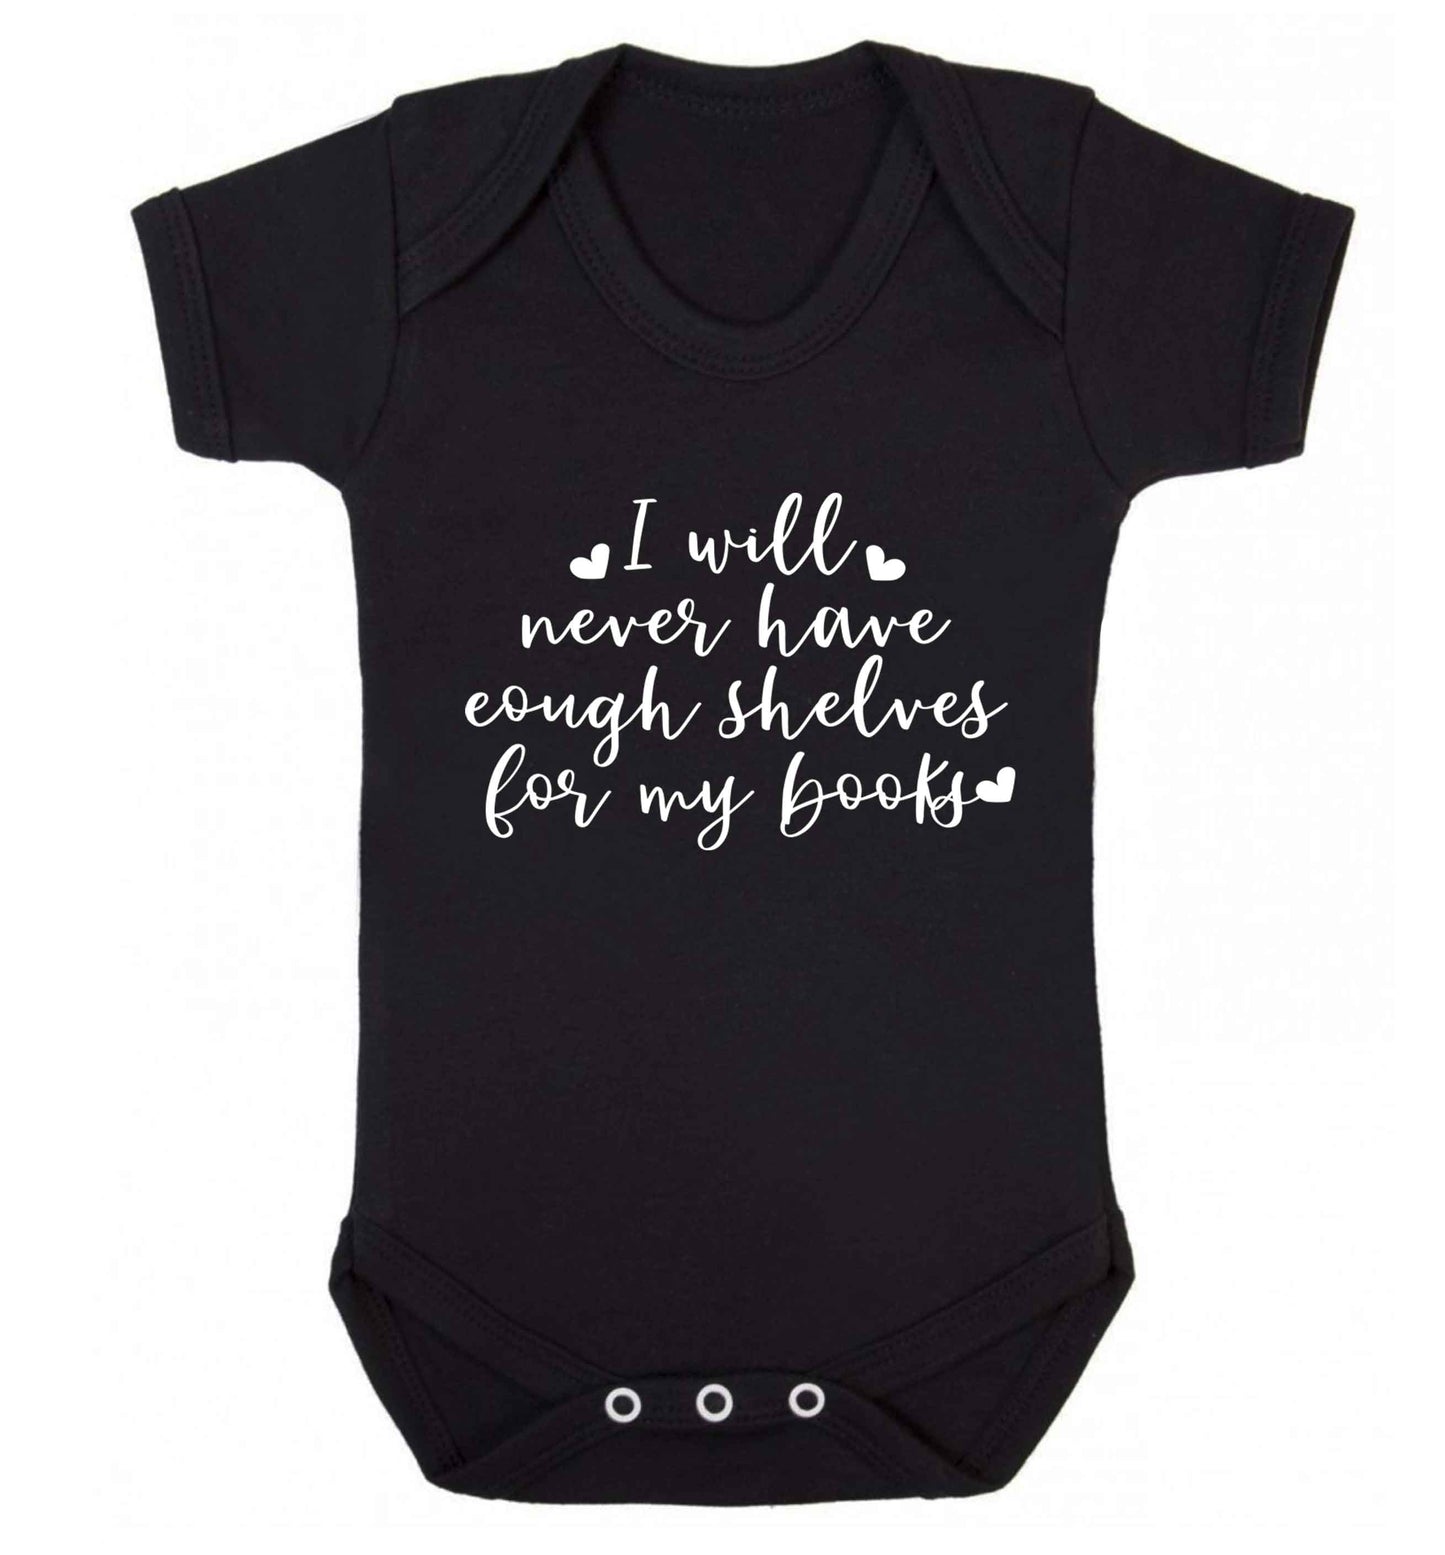 I will never have enough shelves for my books Baby Vest black 18-24 months